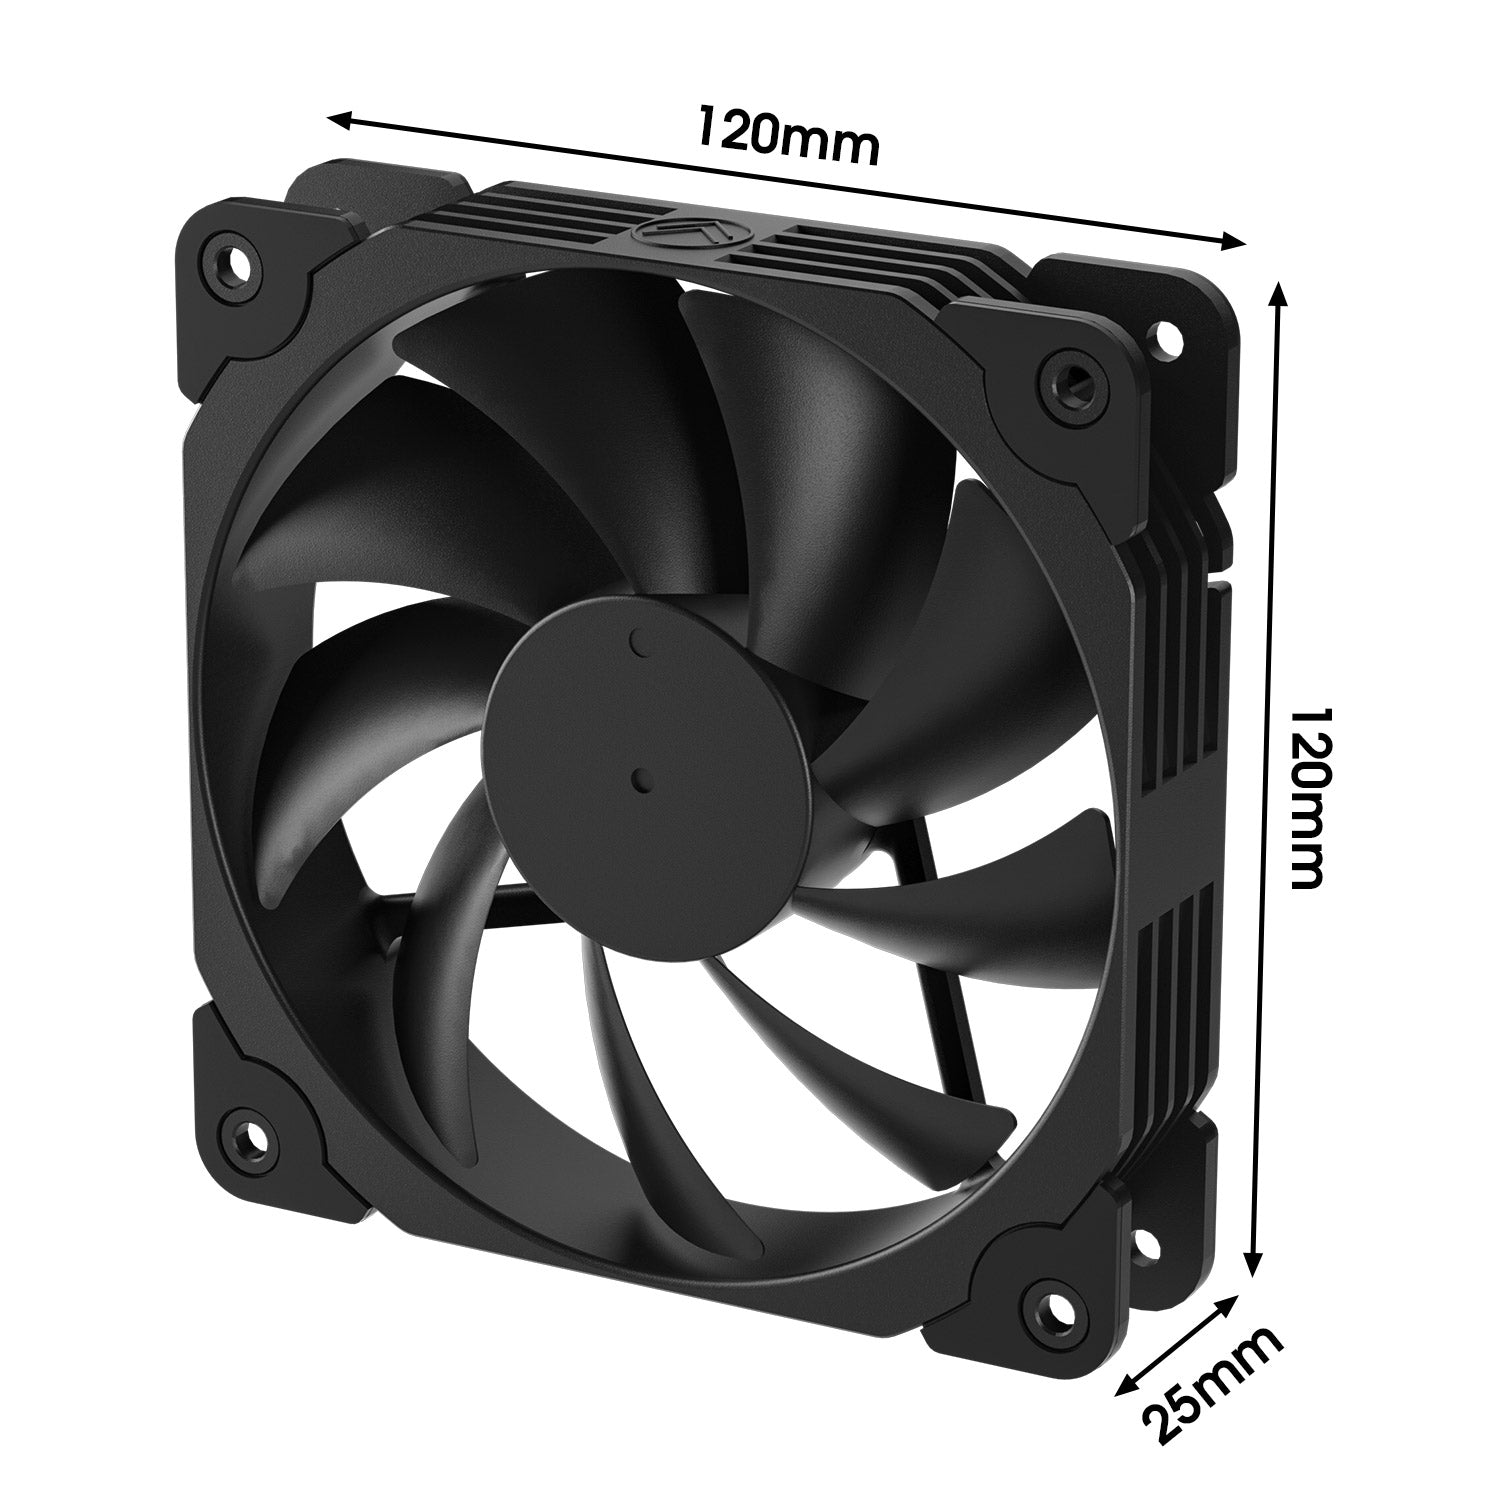 3 x 120mm Cooling Fans Kit for Computer Case